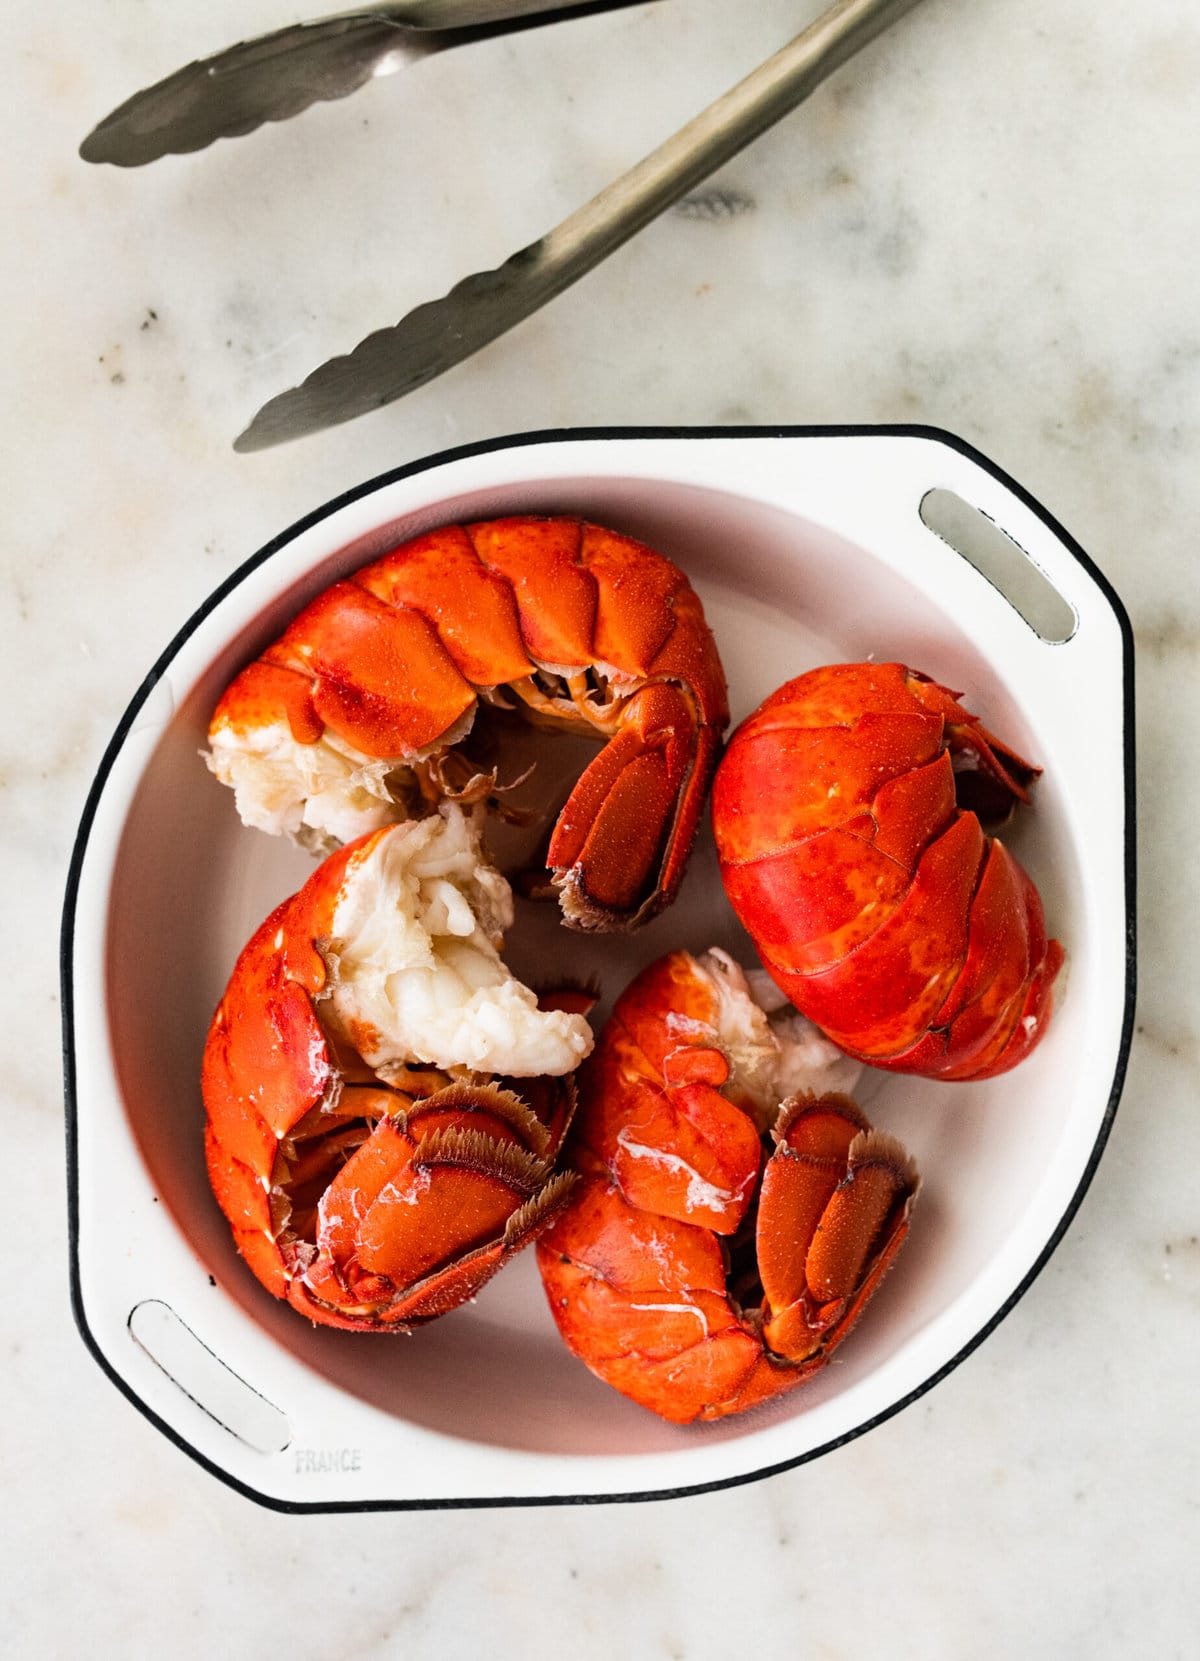 process of making classic lobster bisque: lobster in a dish after boiling.